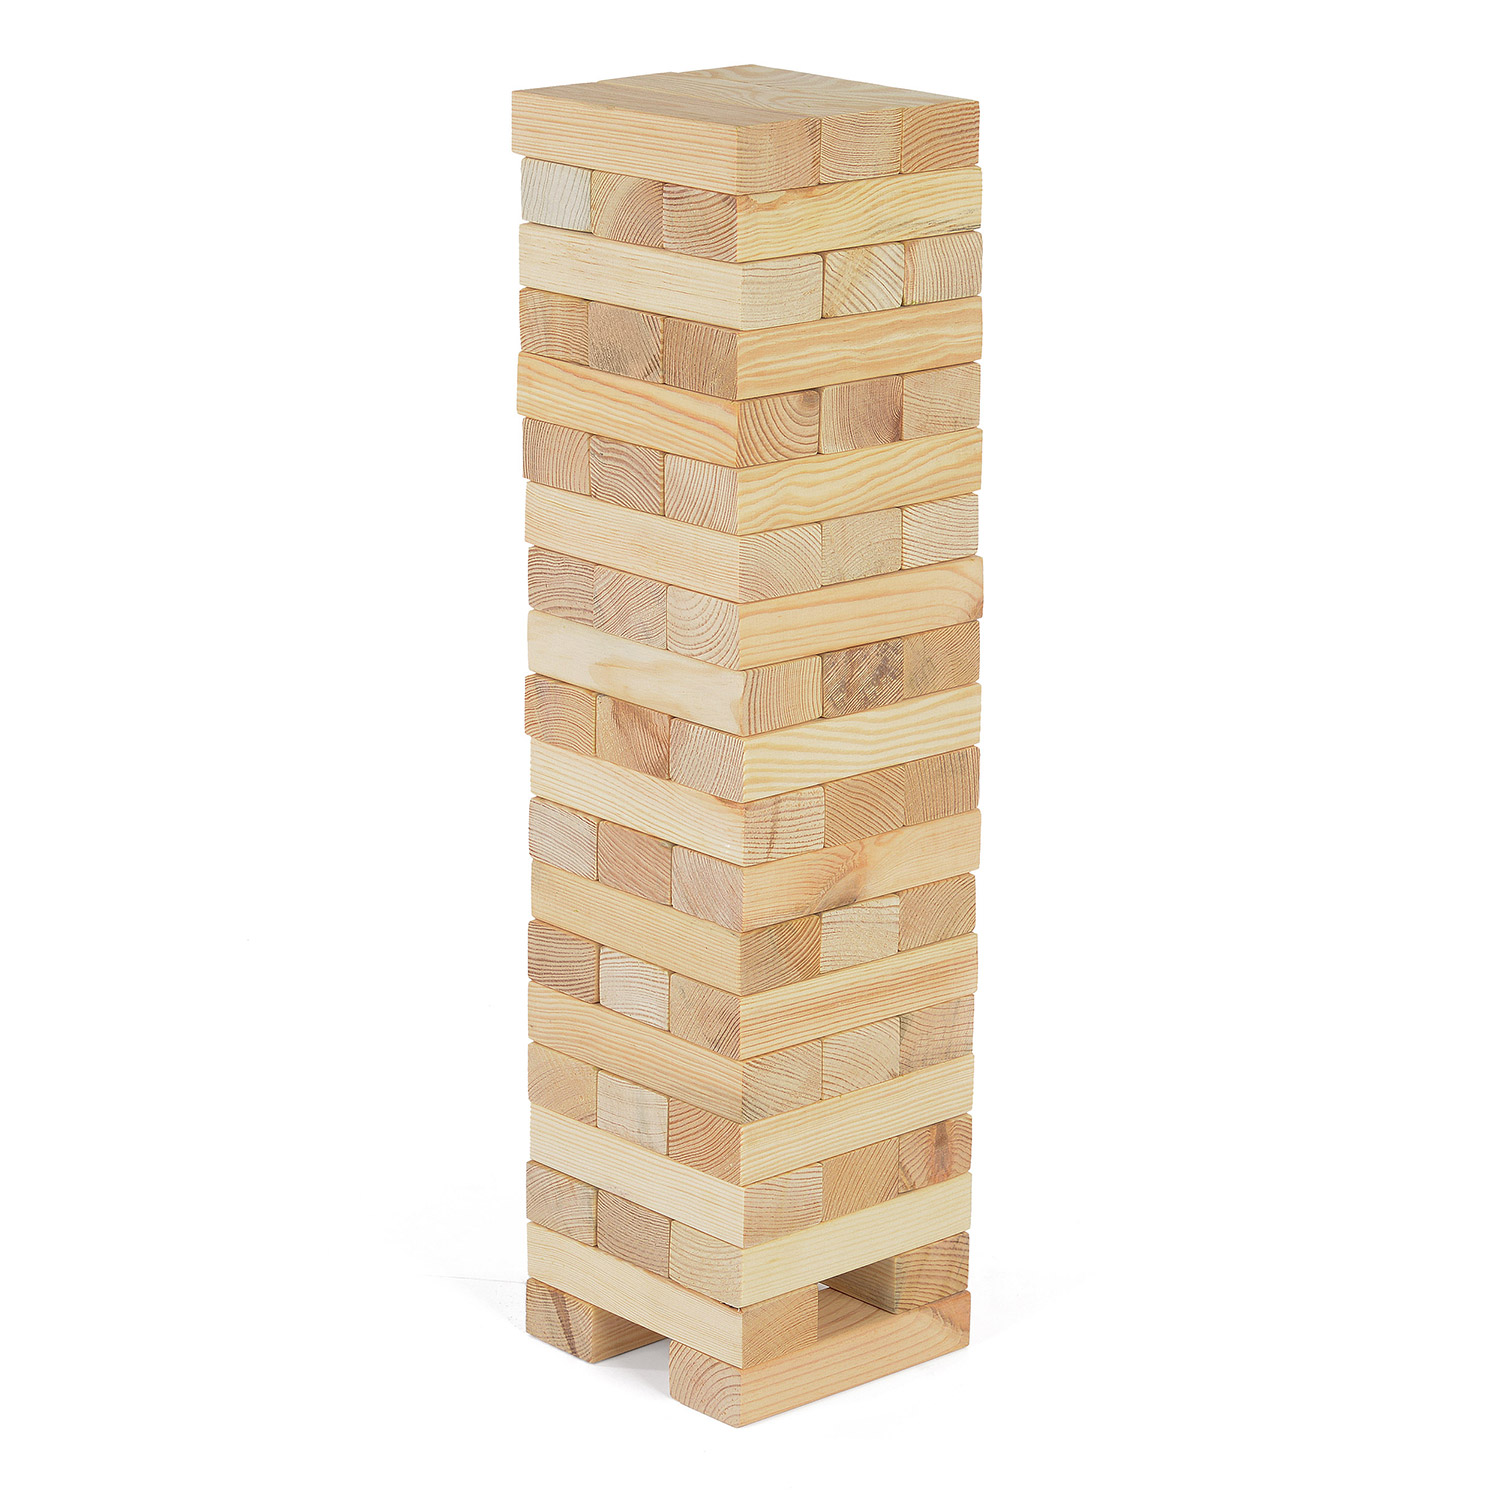 Toyrific Stack n Fall timber tower